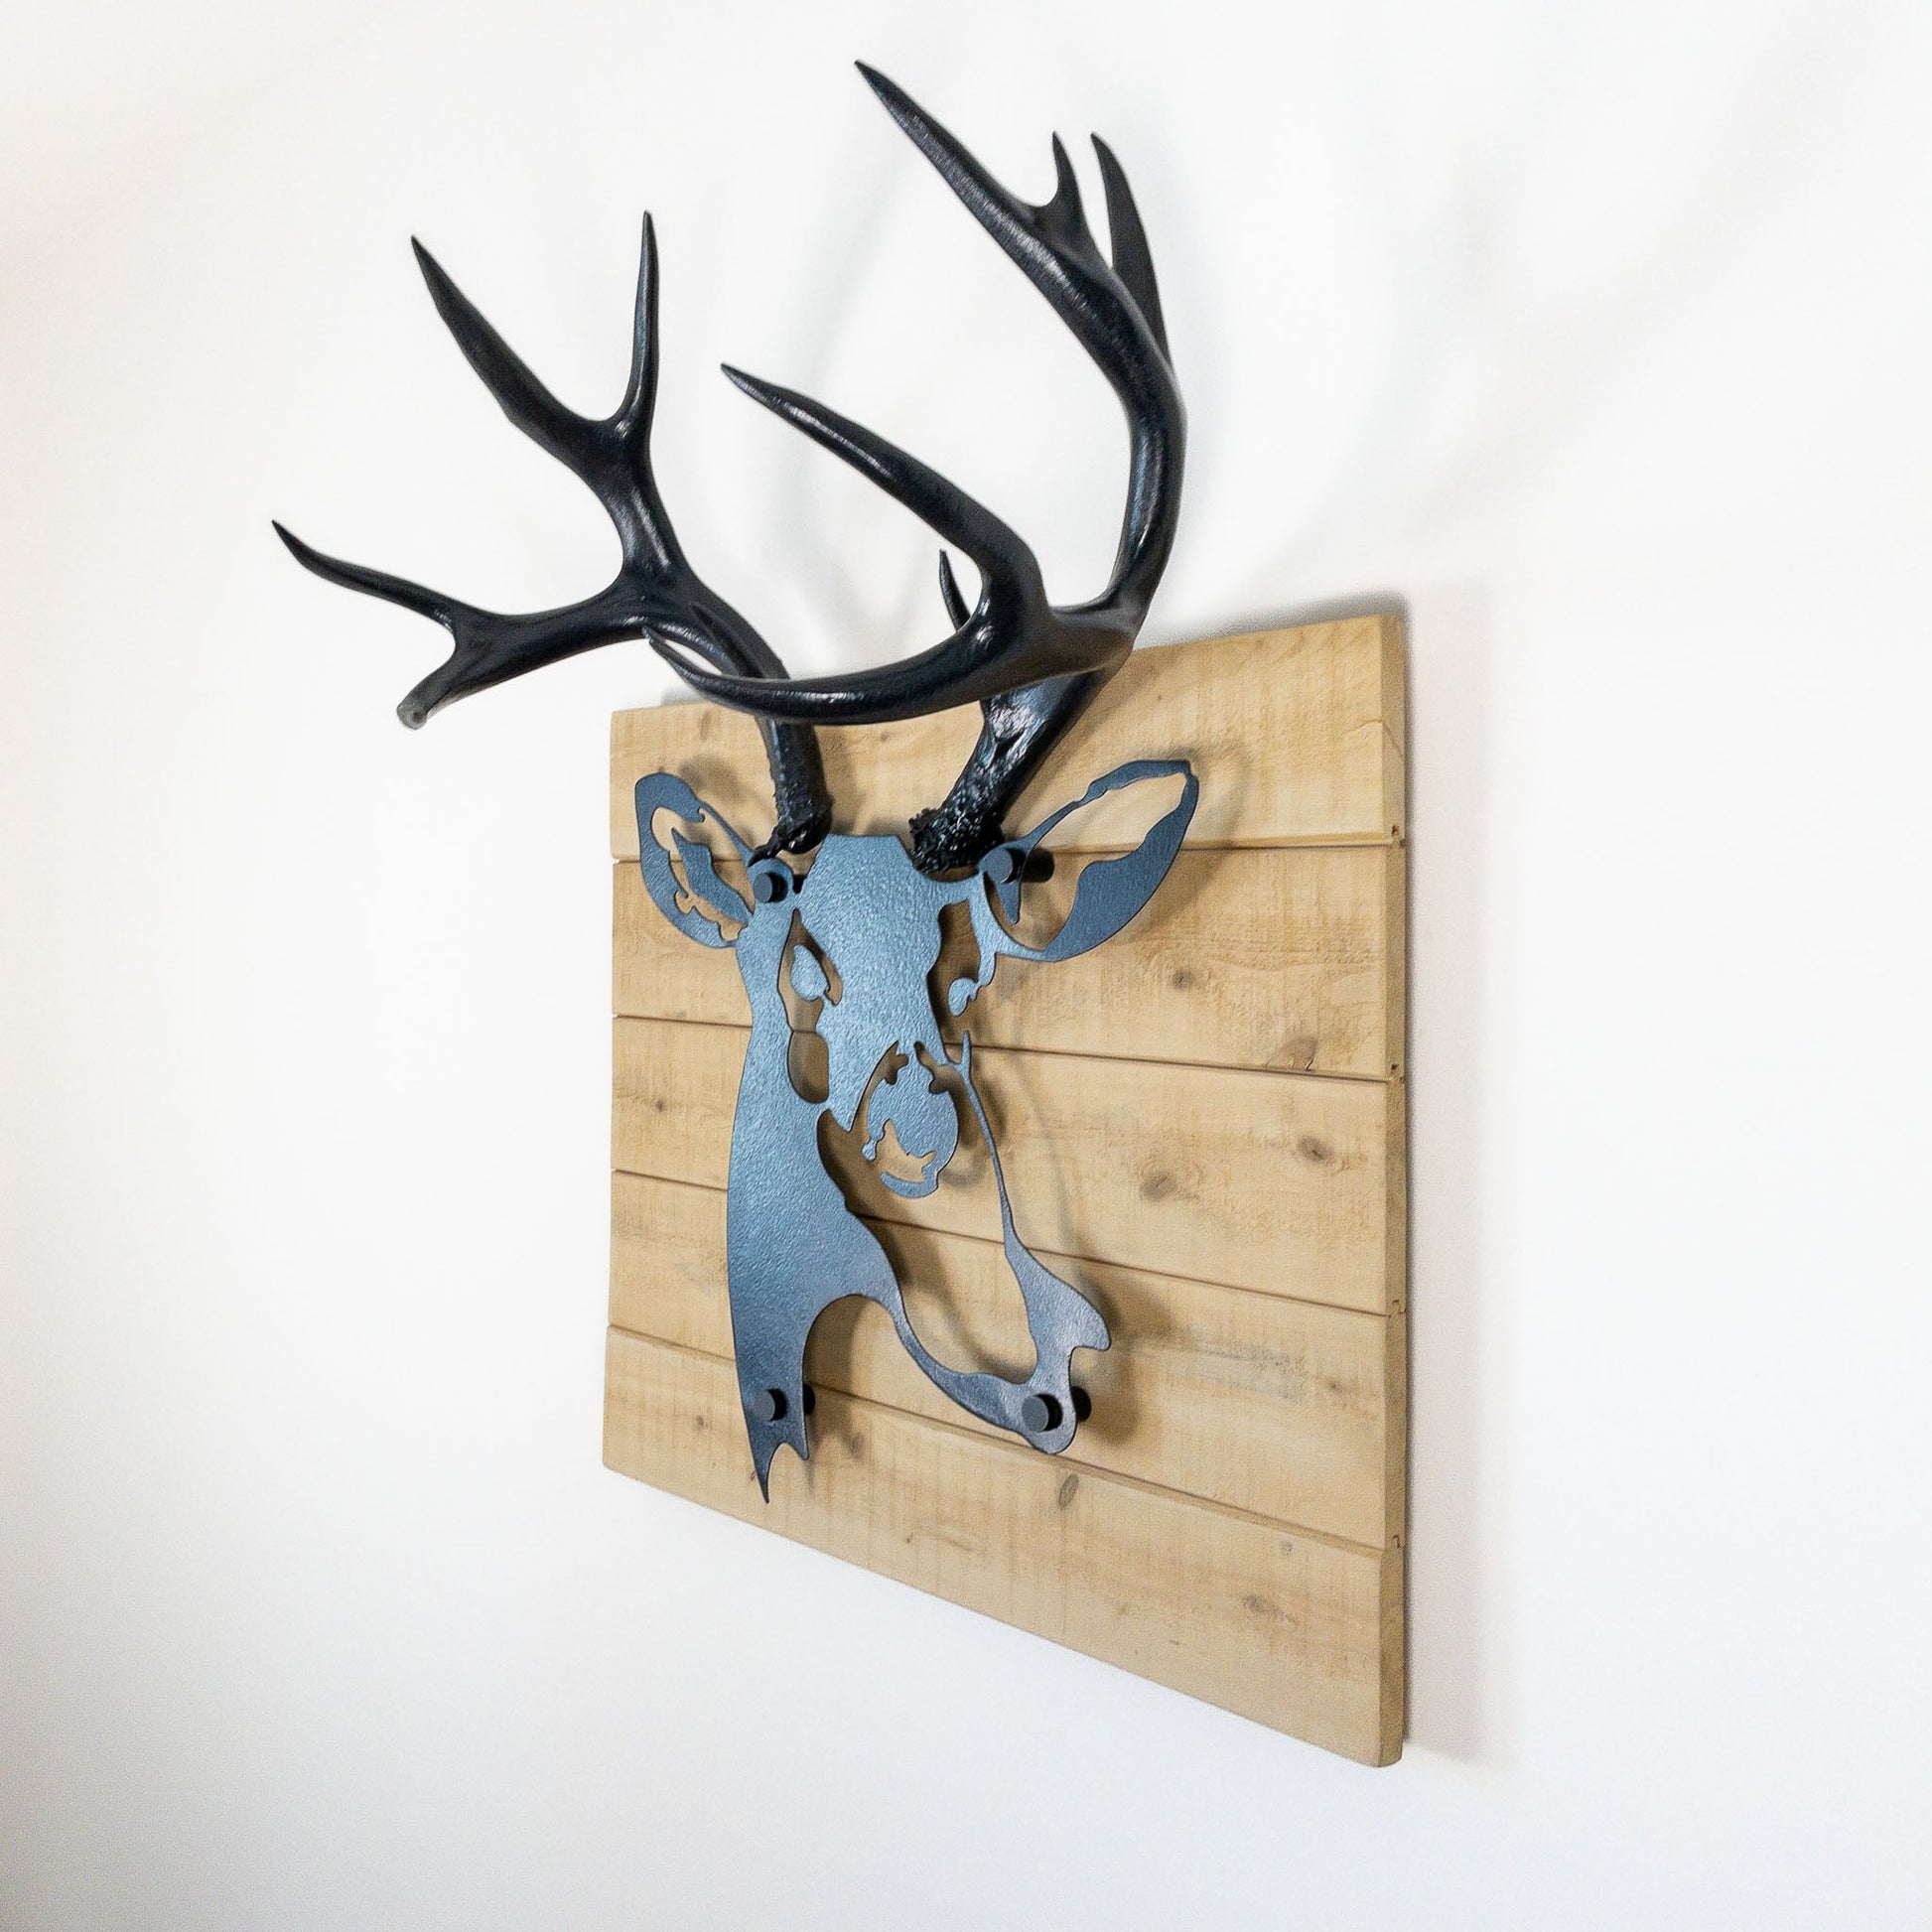 A metal wall decor made from real ethically sourced  Mule Deer antlers mounted on a metal head